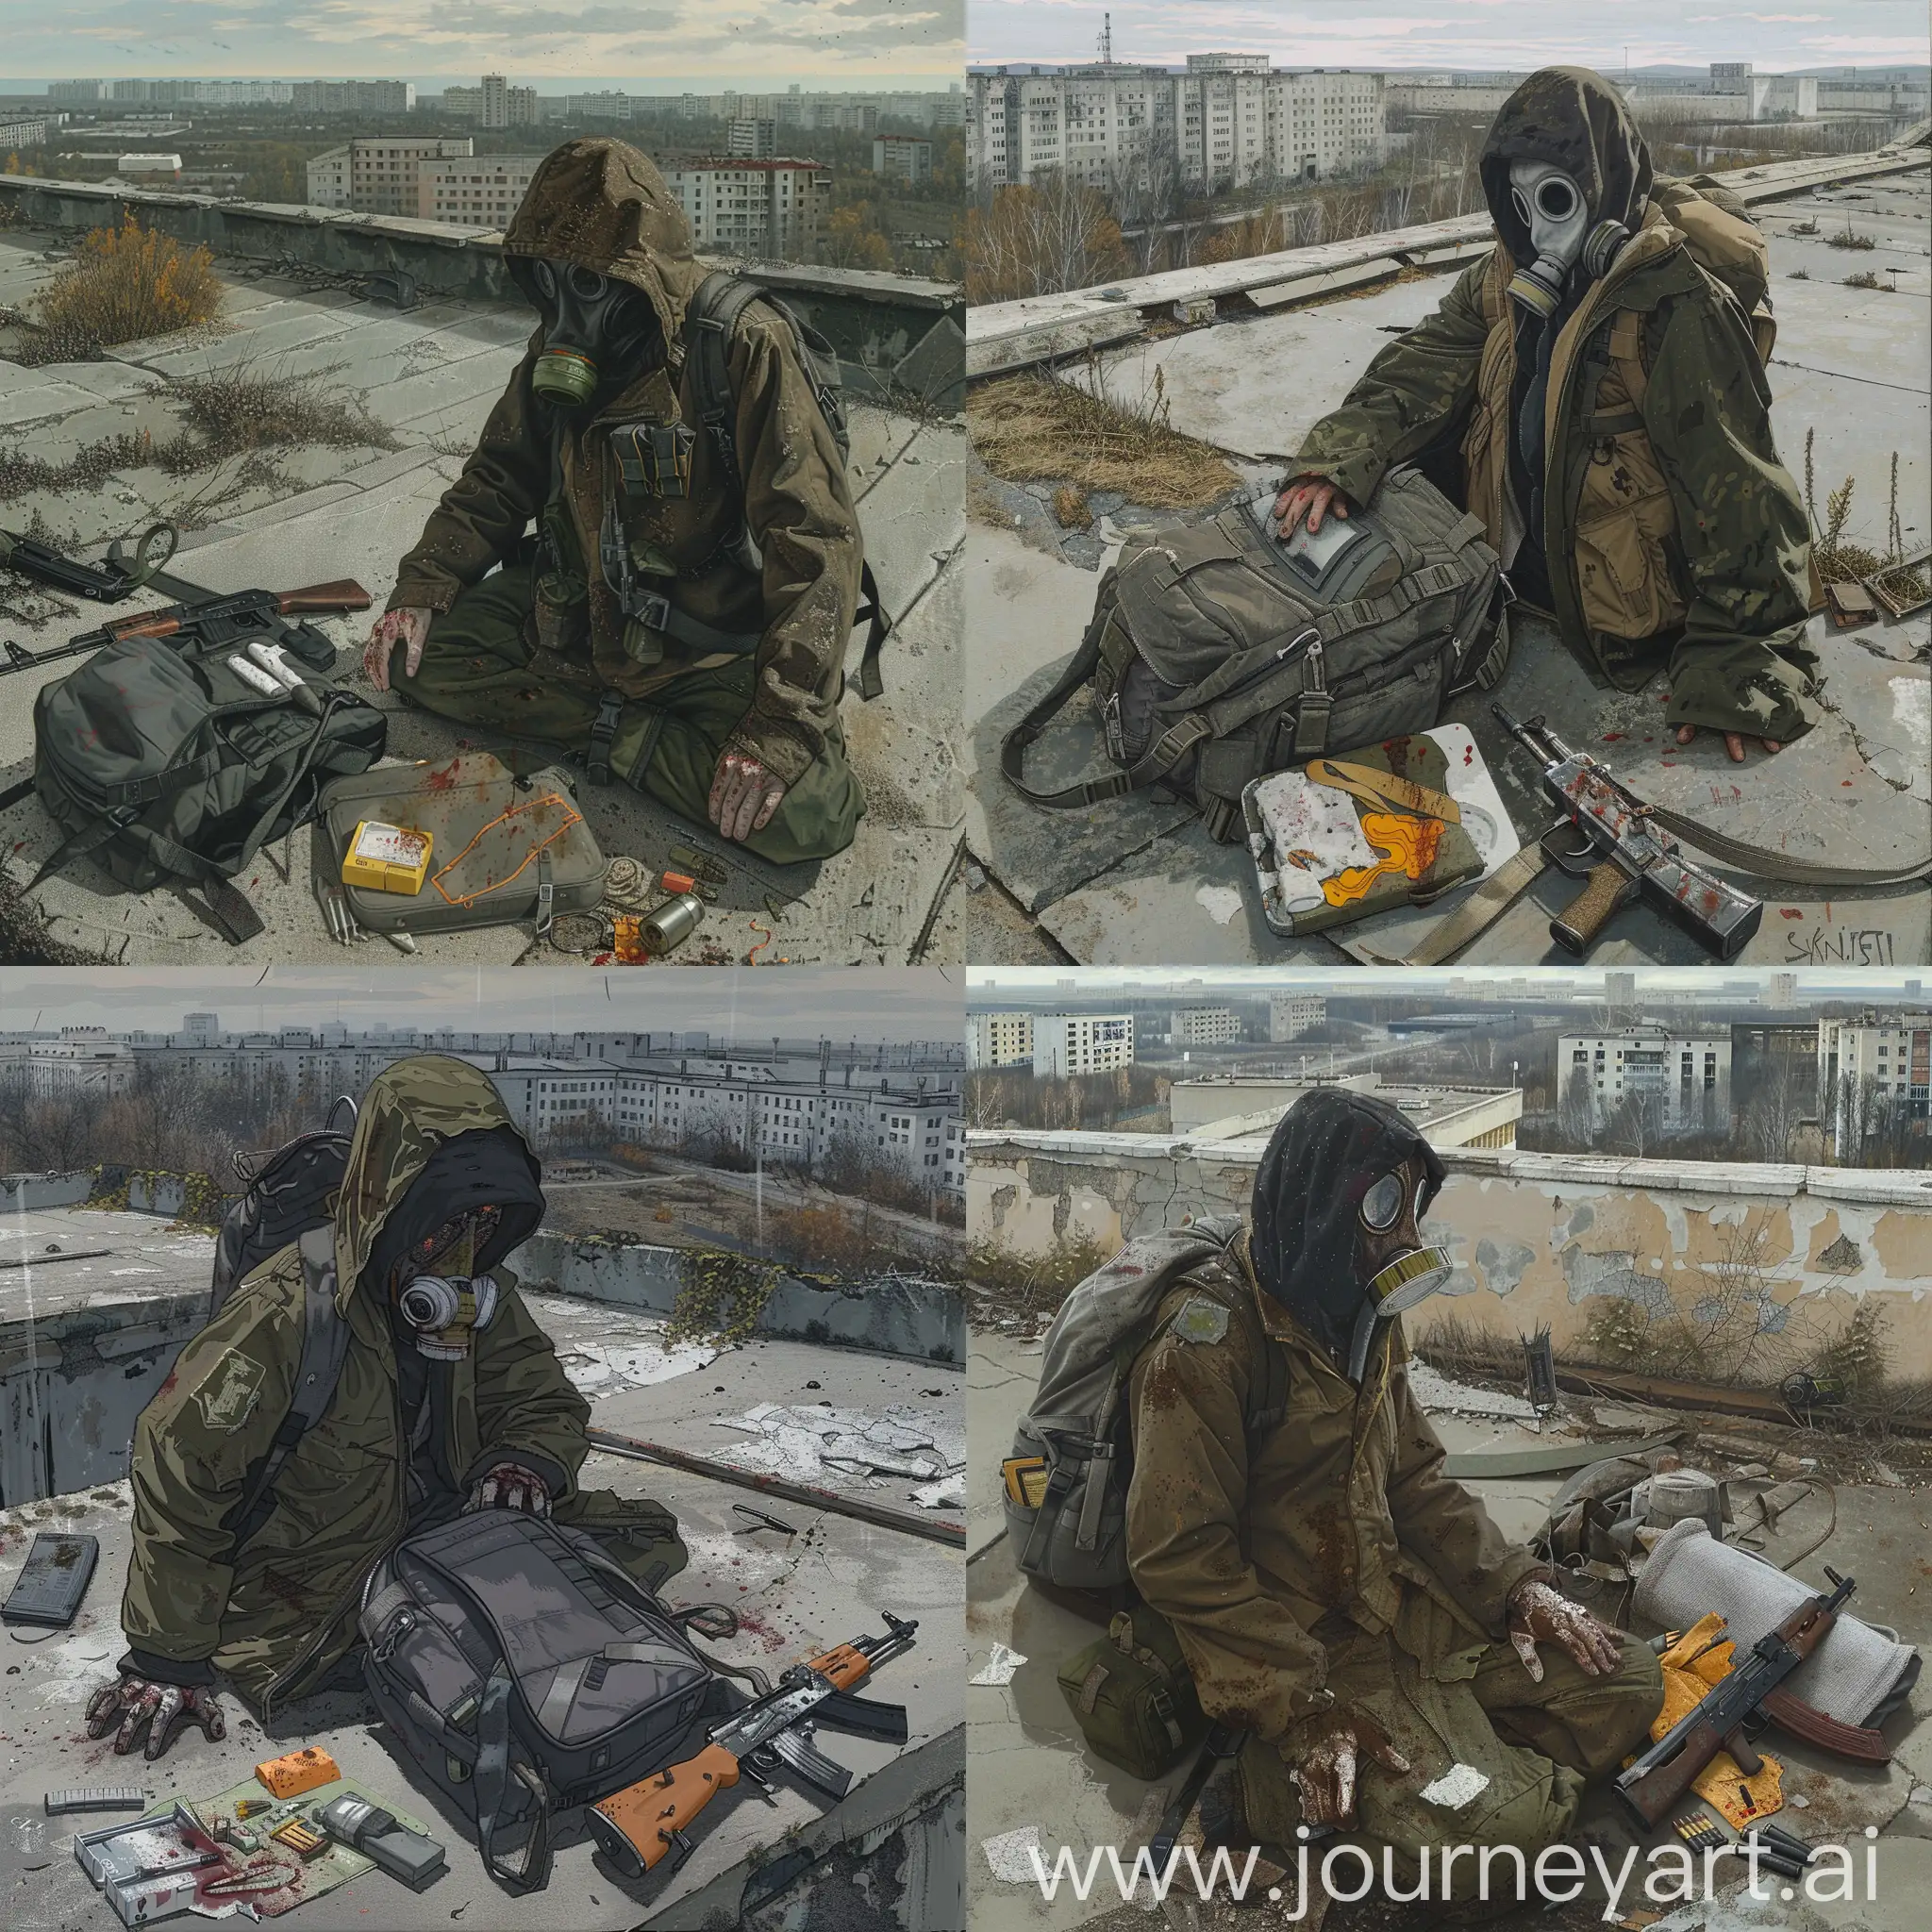 Stalker-in-Gas-Mask-on-Pripyat-Rooftop-with-AK47